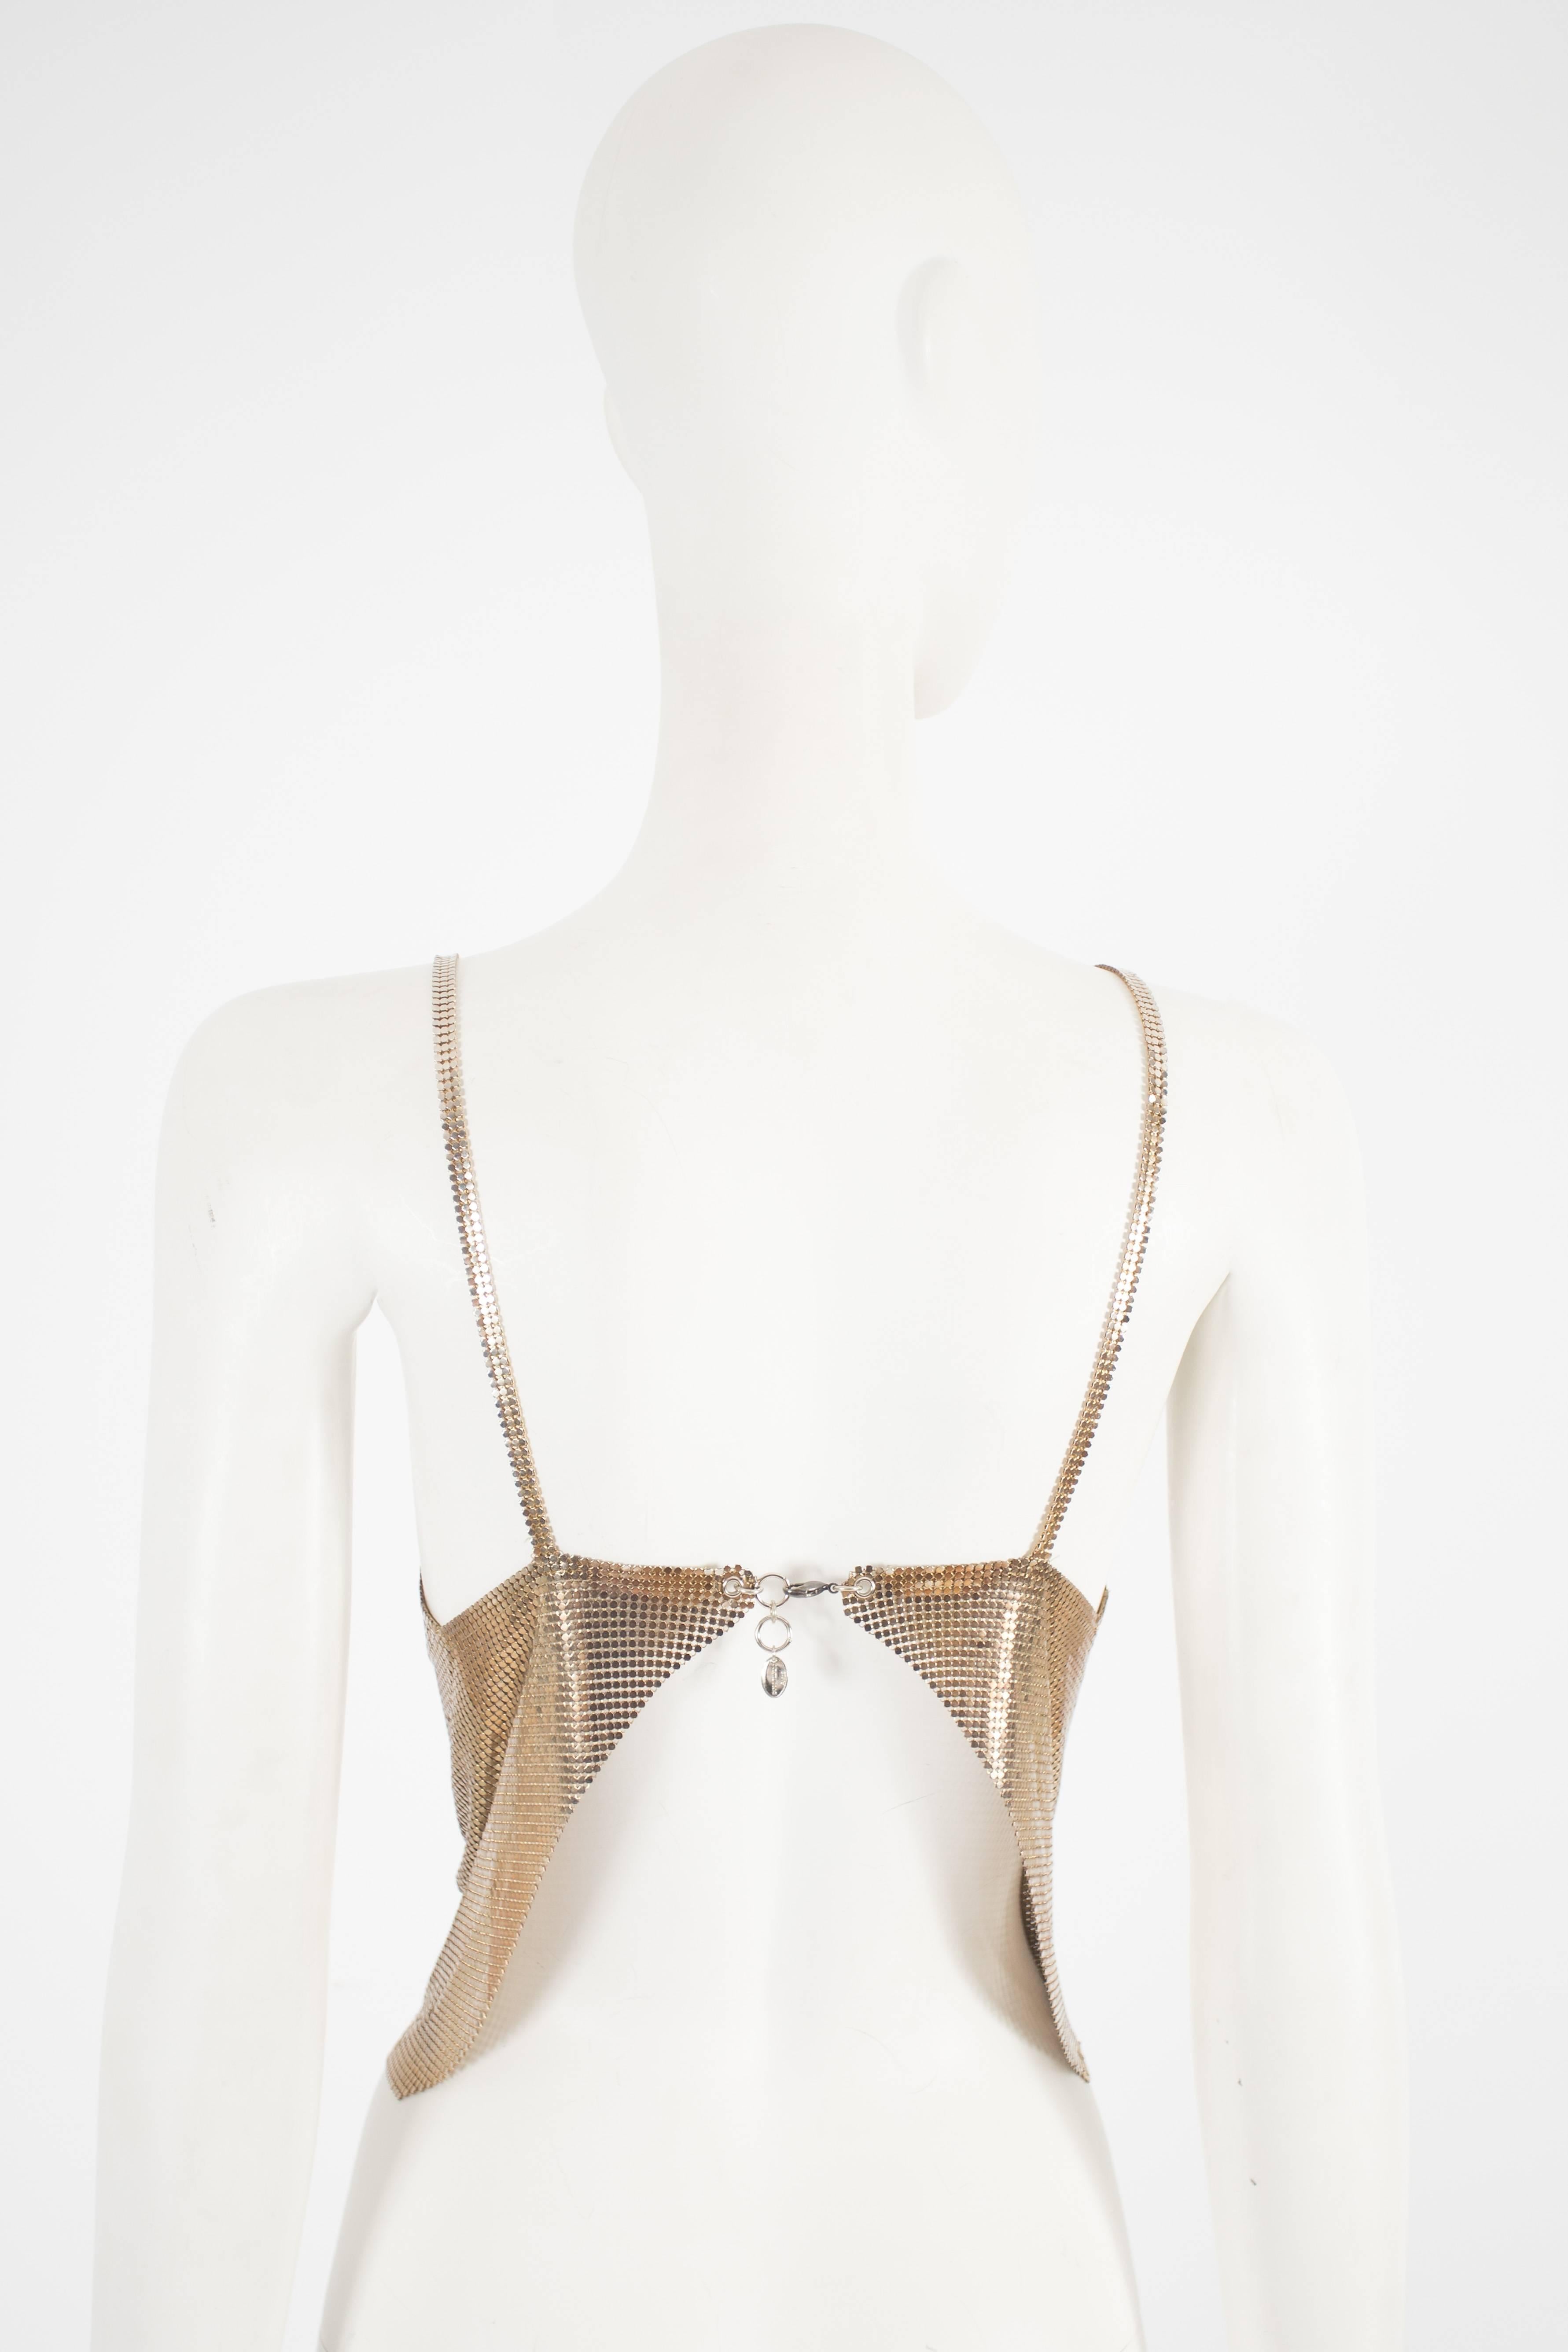 Brown Paco Rabanne gold chainmail evening vest, circa 1968